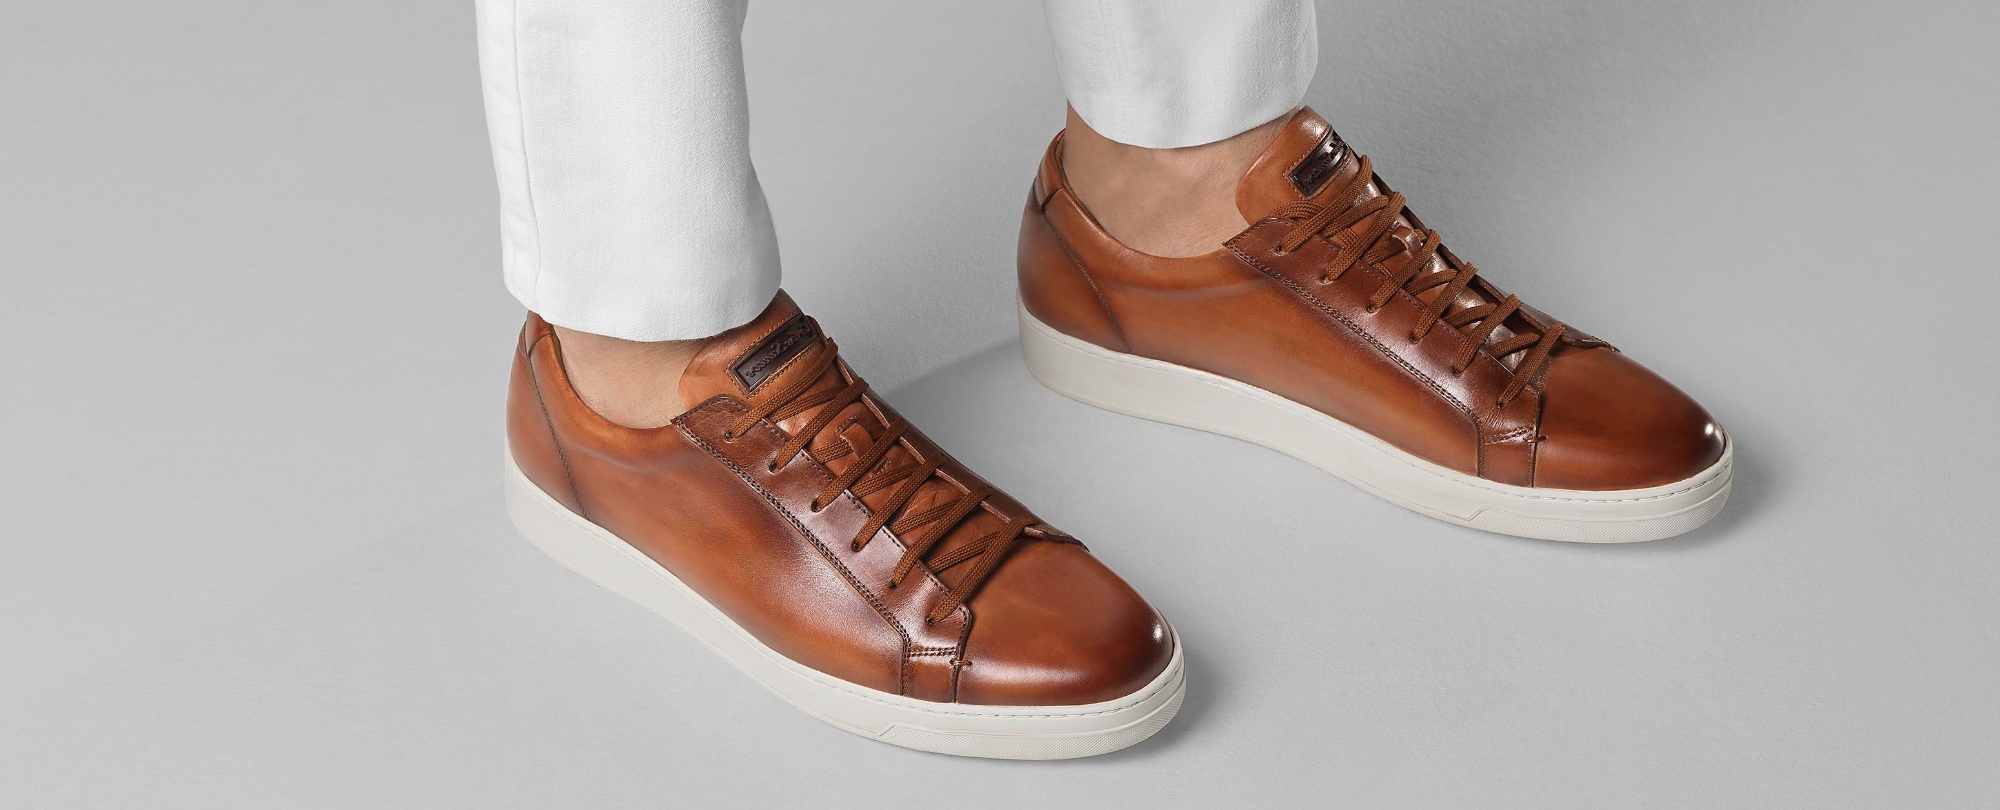 Leather Sneakers | Carlos Santos Shoes - Luxury Shoes